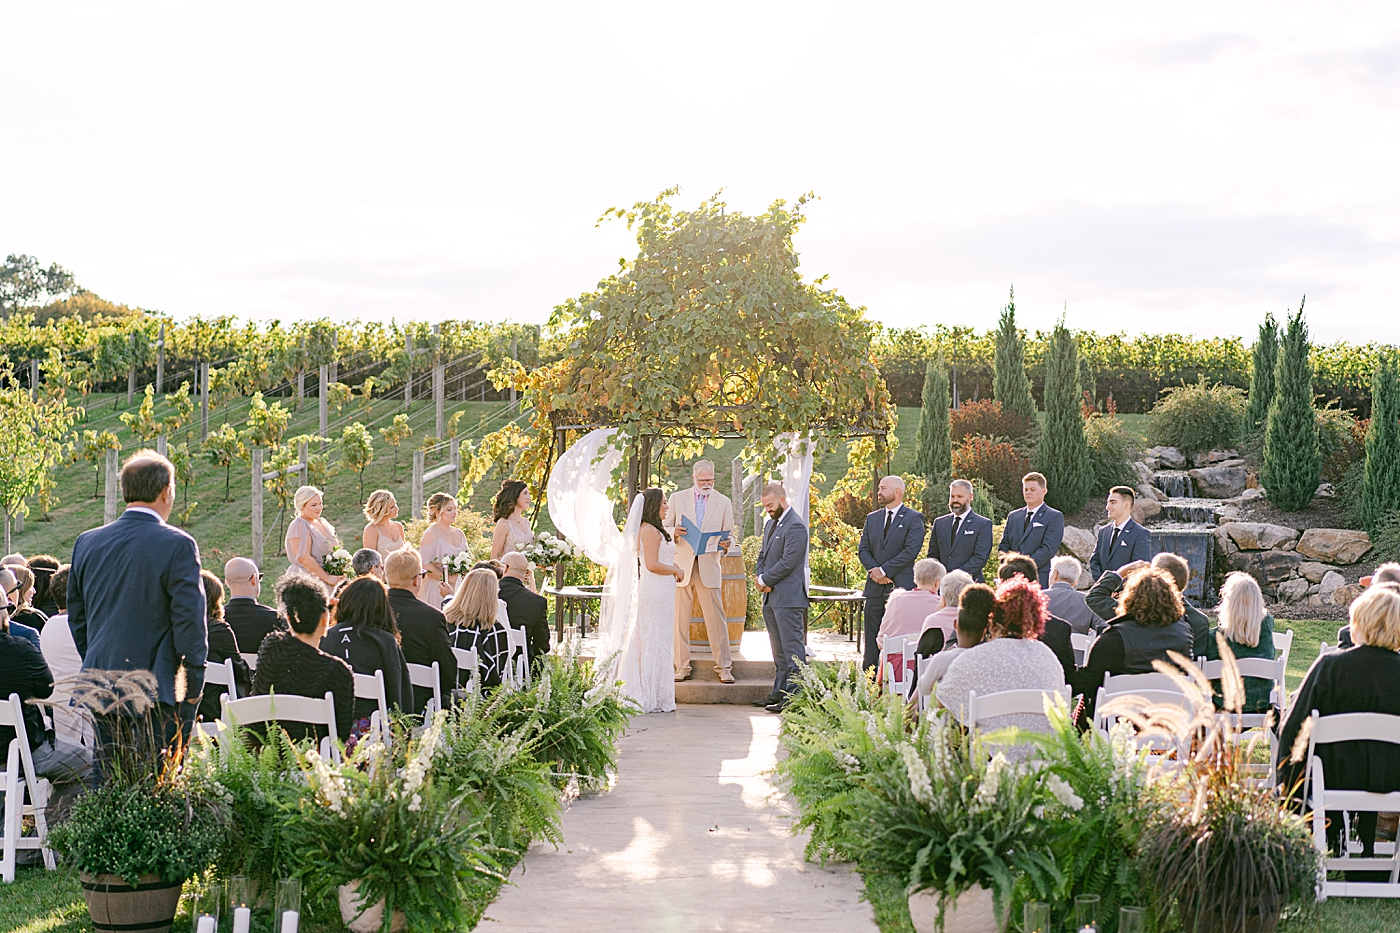 Bride and groom saying their vows at their folino estate wedding | Photo by Hope Helmuth Photography